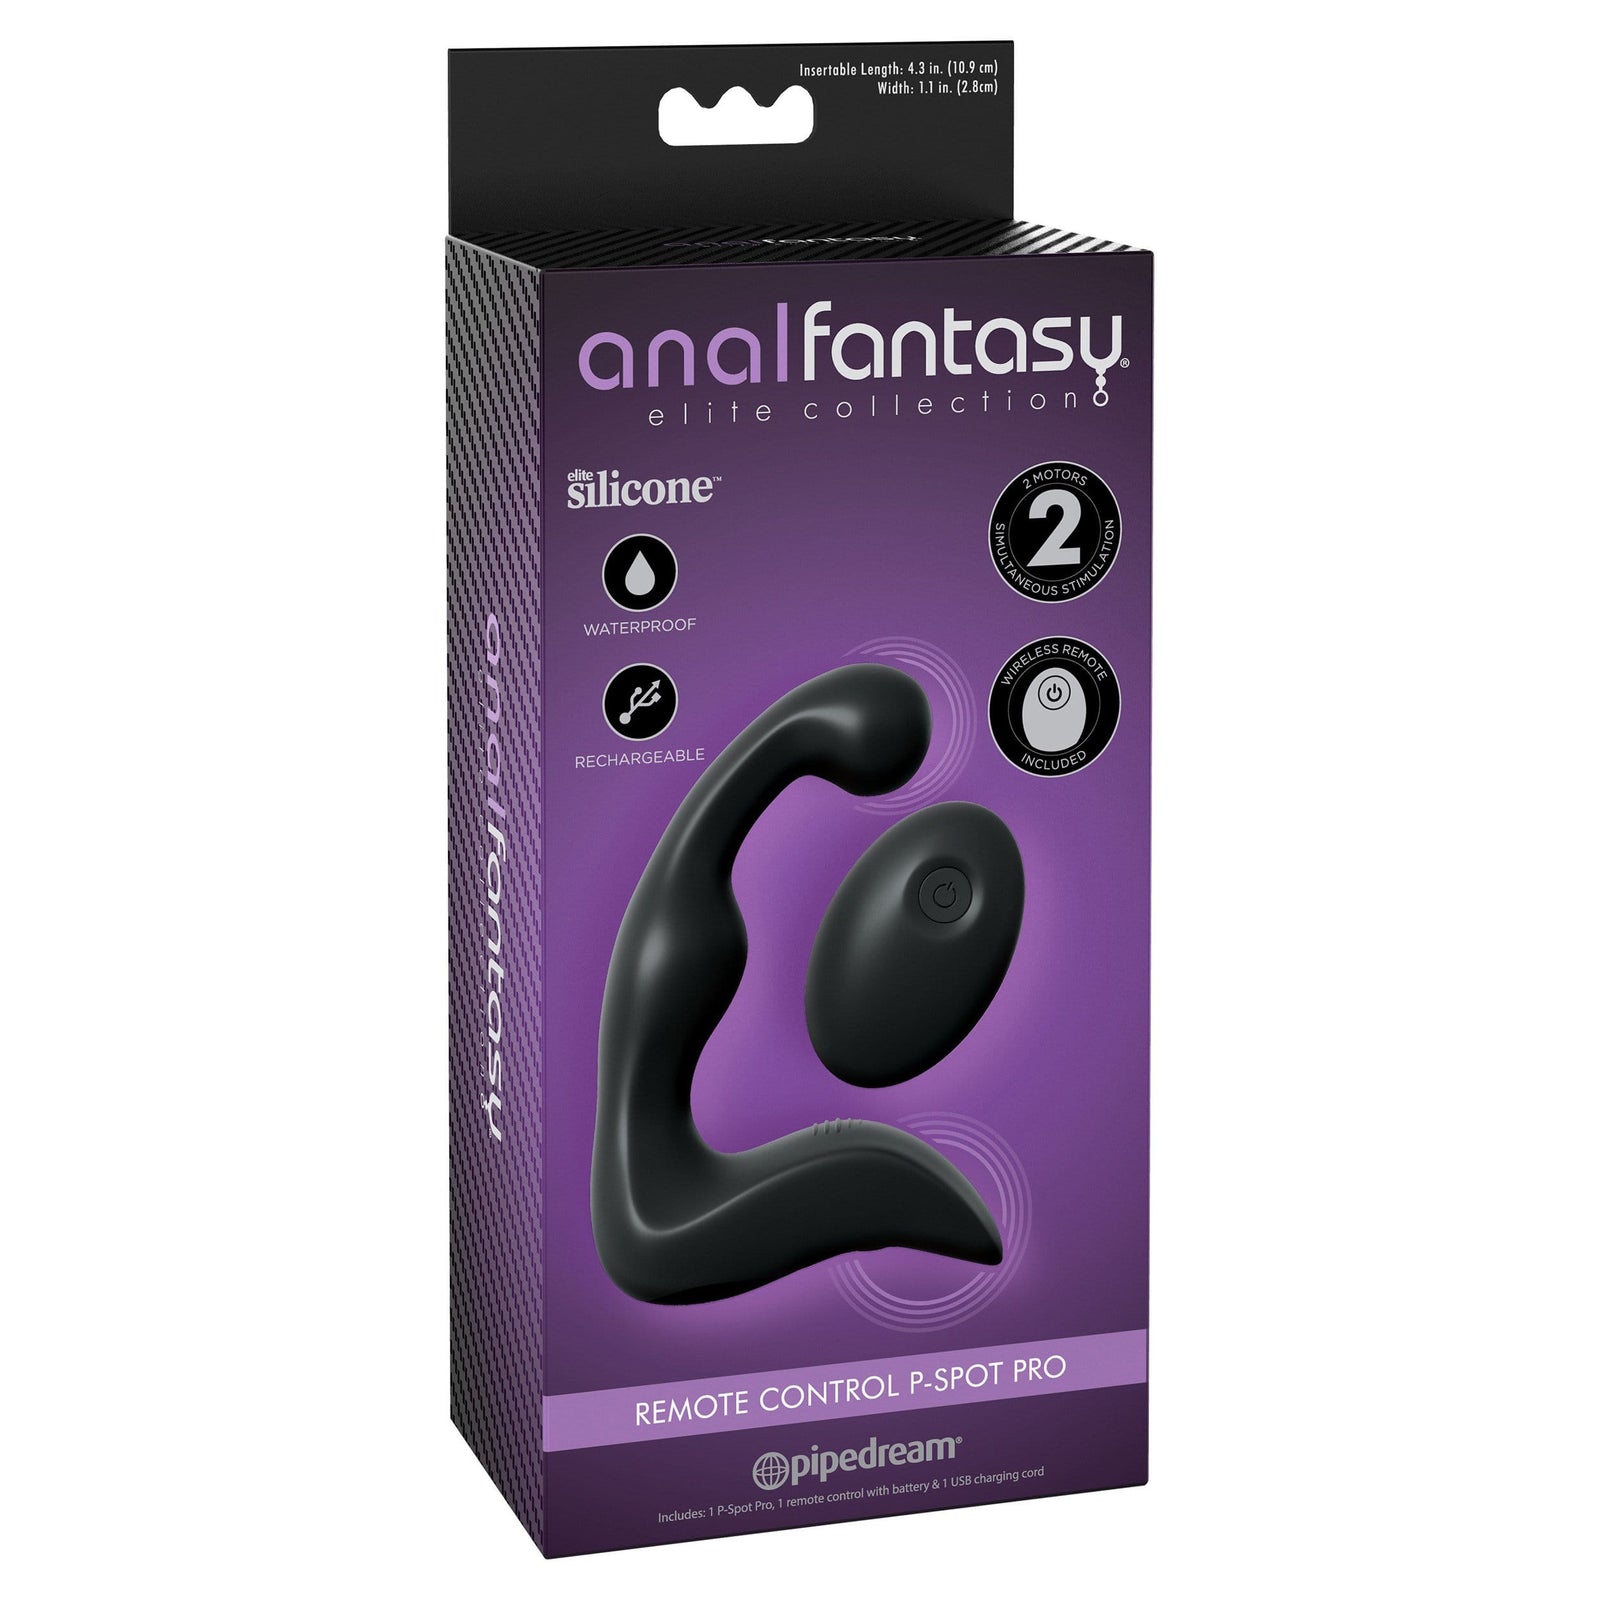 Pipedream - Anal Fantasy Elite Remote Control P Spot Pro Prostate Massager (Black) Prostate Massager (Vibration) Non-Rechargeable 324153168 CherryAffairs